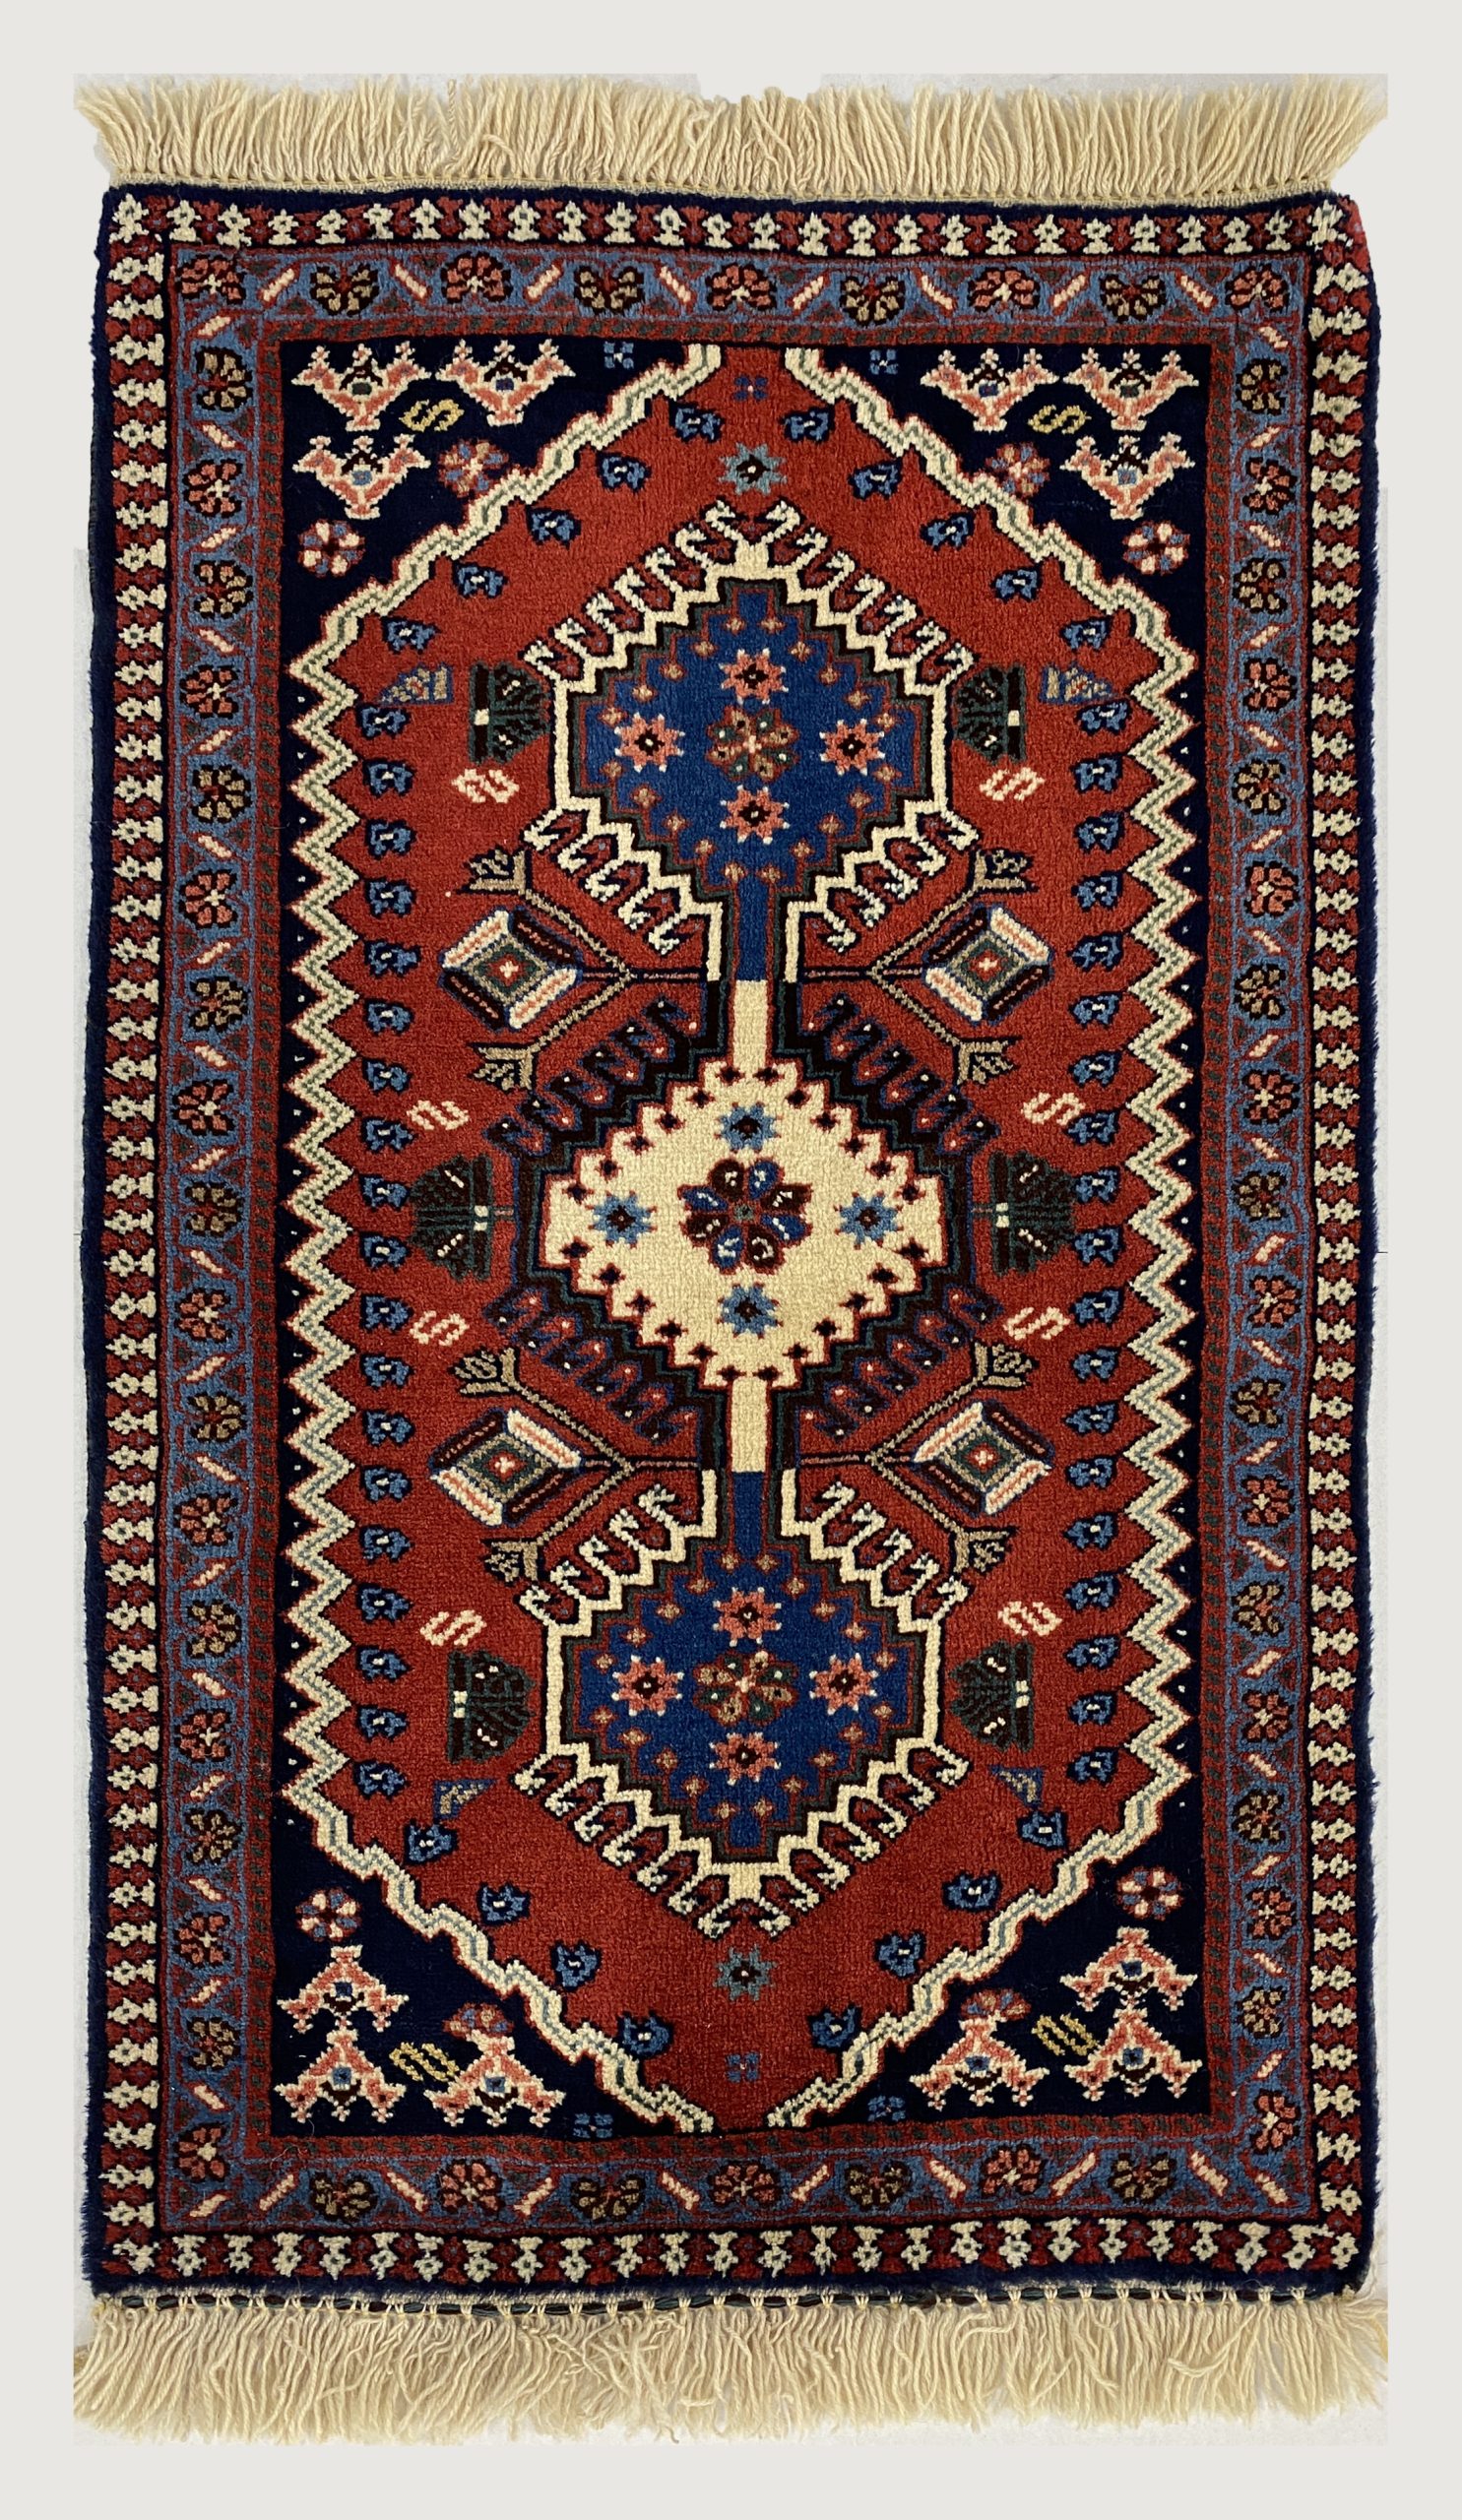 Rug# 10084, Aliabad Yalameh, vegtable dyes, Qashqai weave, south Persia, size 97x58 cm (2)